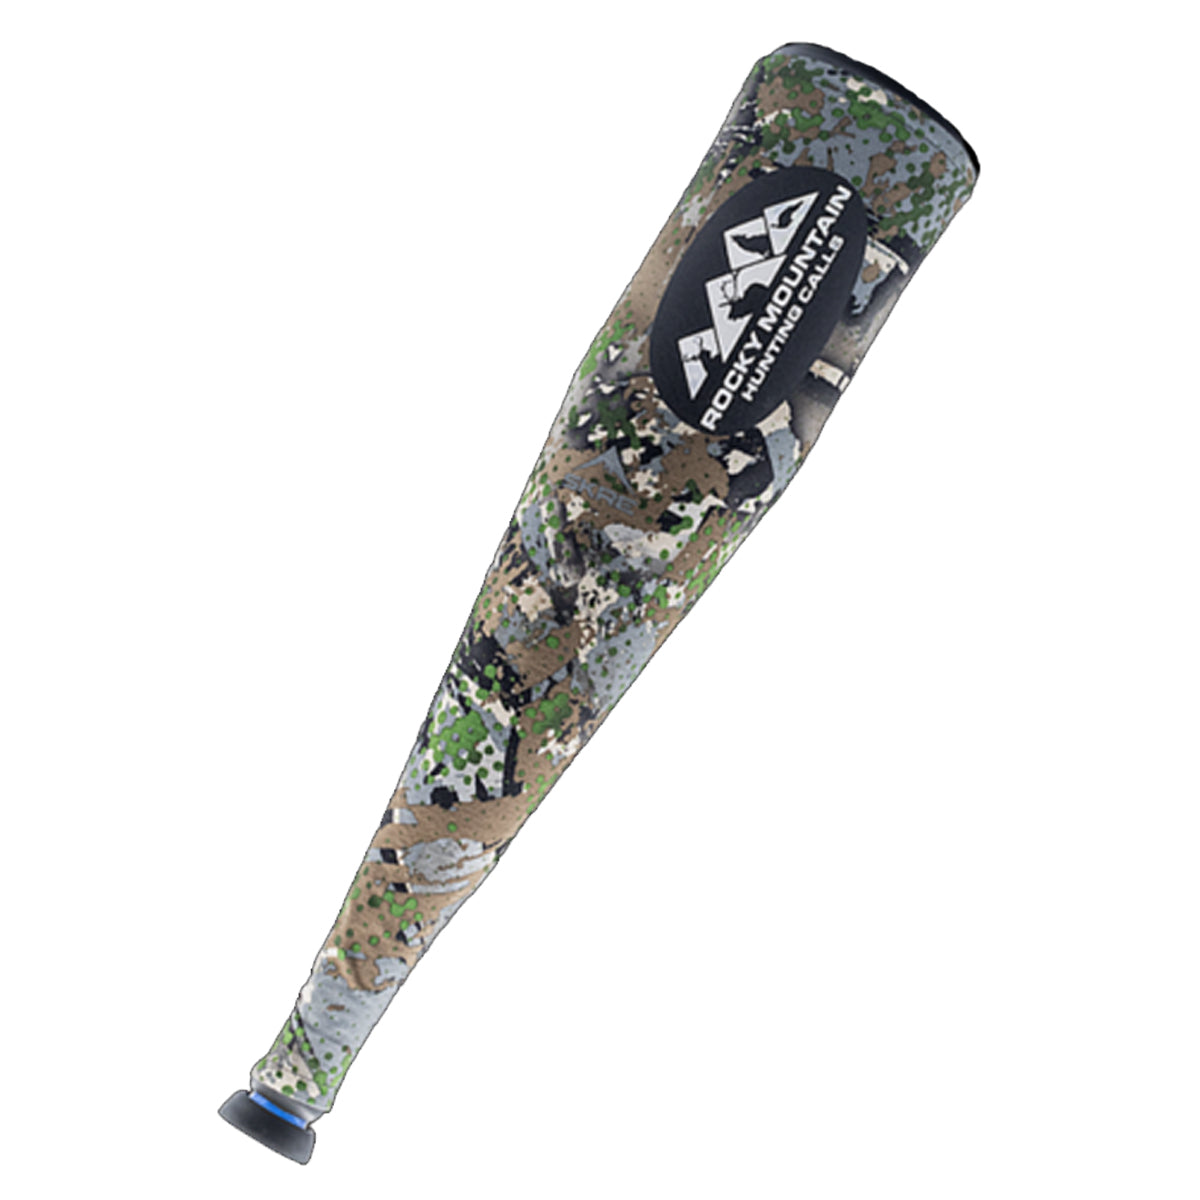 Rocky Mountain Hunting Calls Steve Chappell Signature Series Rogue Bugle Tube in  by GOHUNT | Rocky Mountain Hunting Calls - GOHUNT Shop